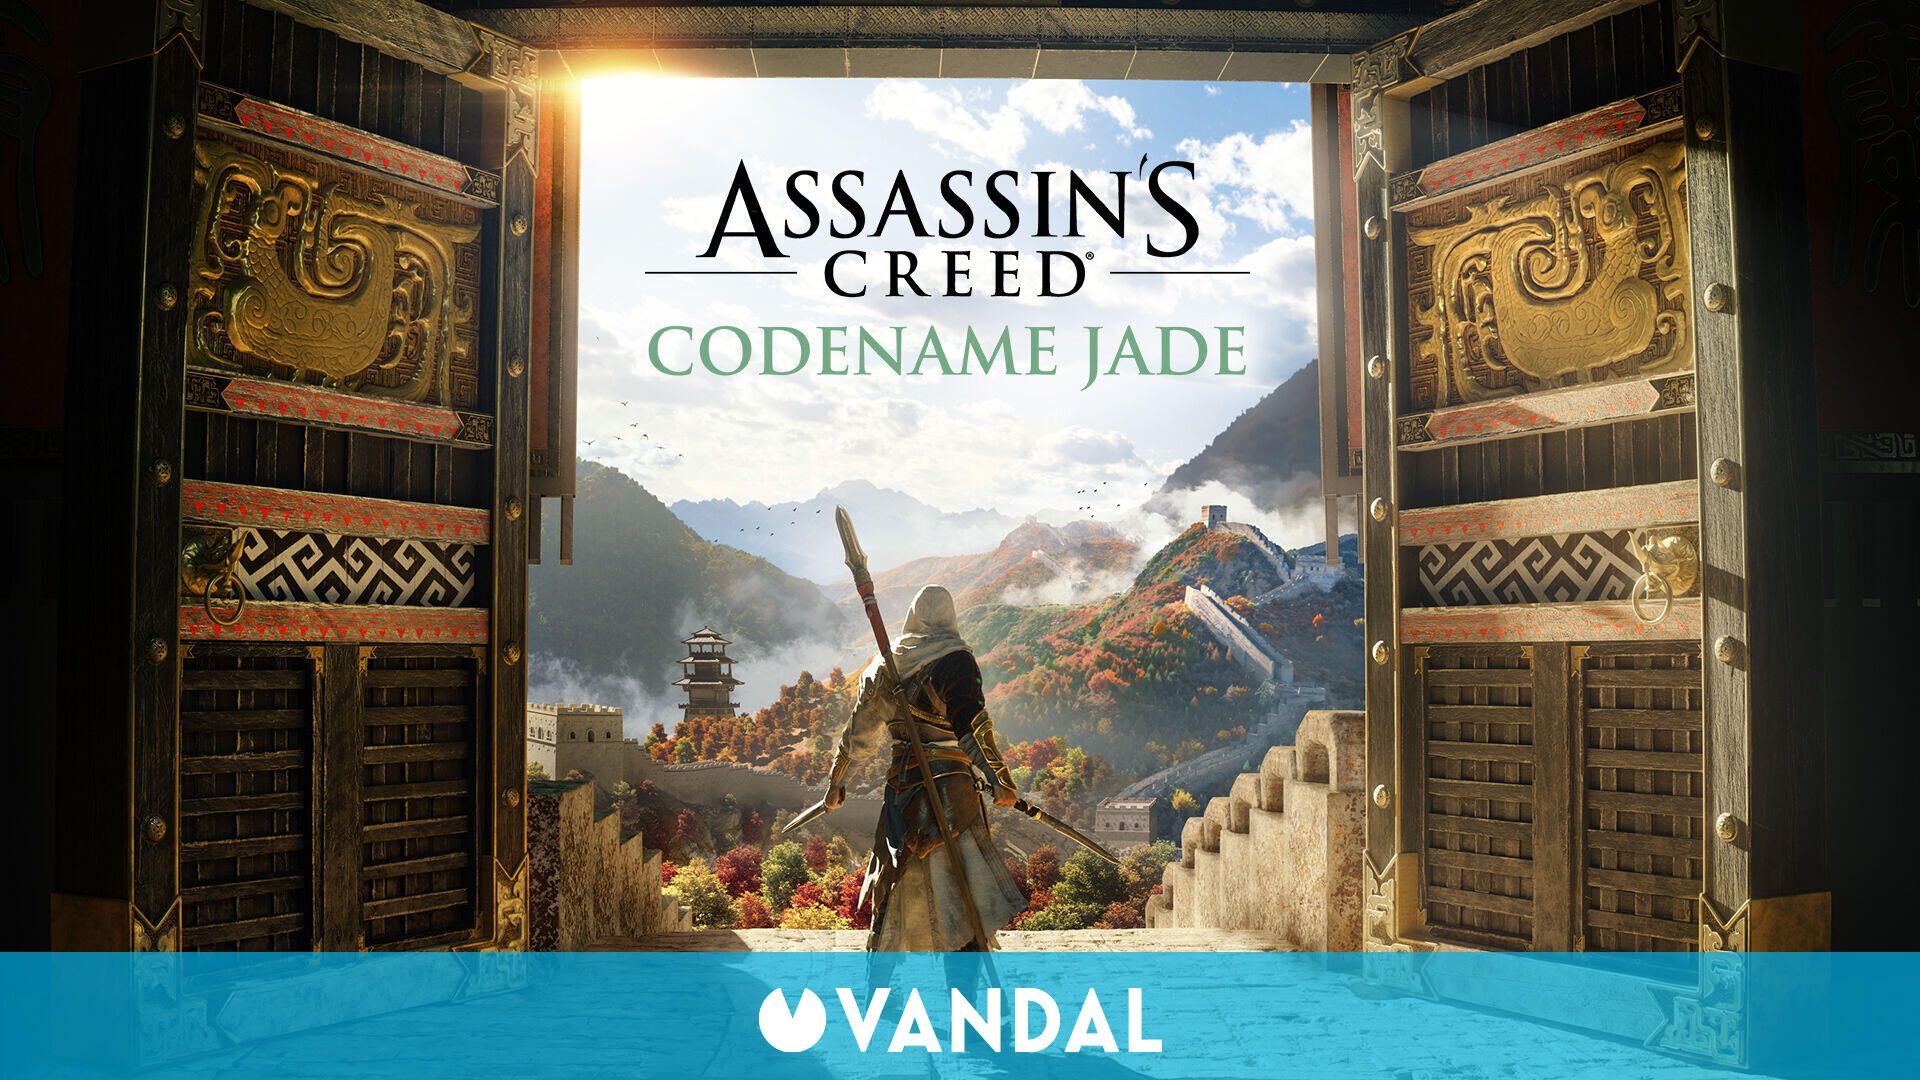 Assassin’s Creed Codename Jade demo gameplay and open demo registration